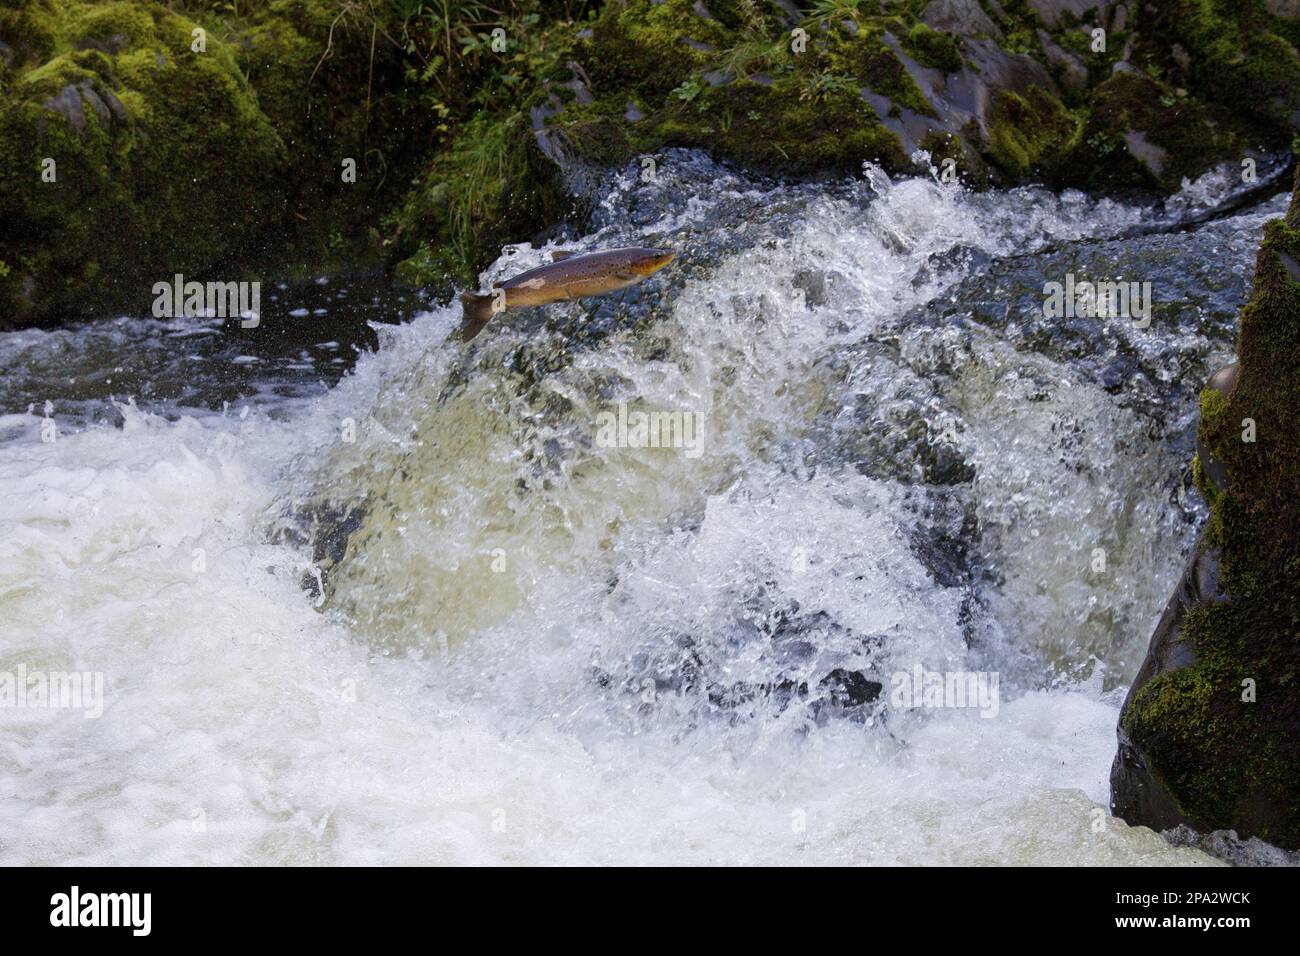 Brown trout (Salmo trutta trutta) adult, jumping up waterfall, moving upstream to spawning site, River Whiteadder, Berwickshire, Scottish Borders Stock Photo